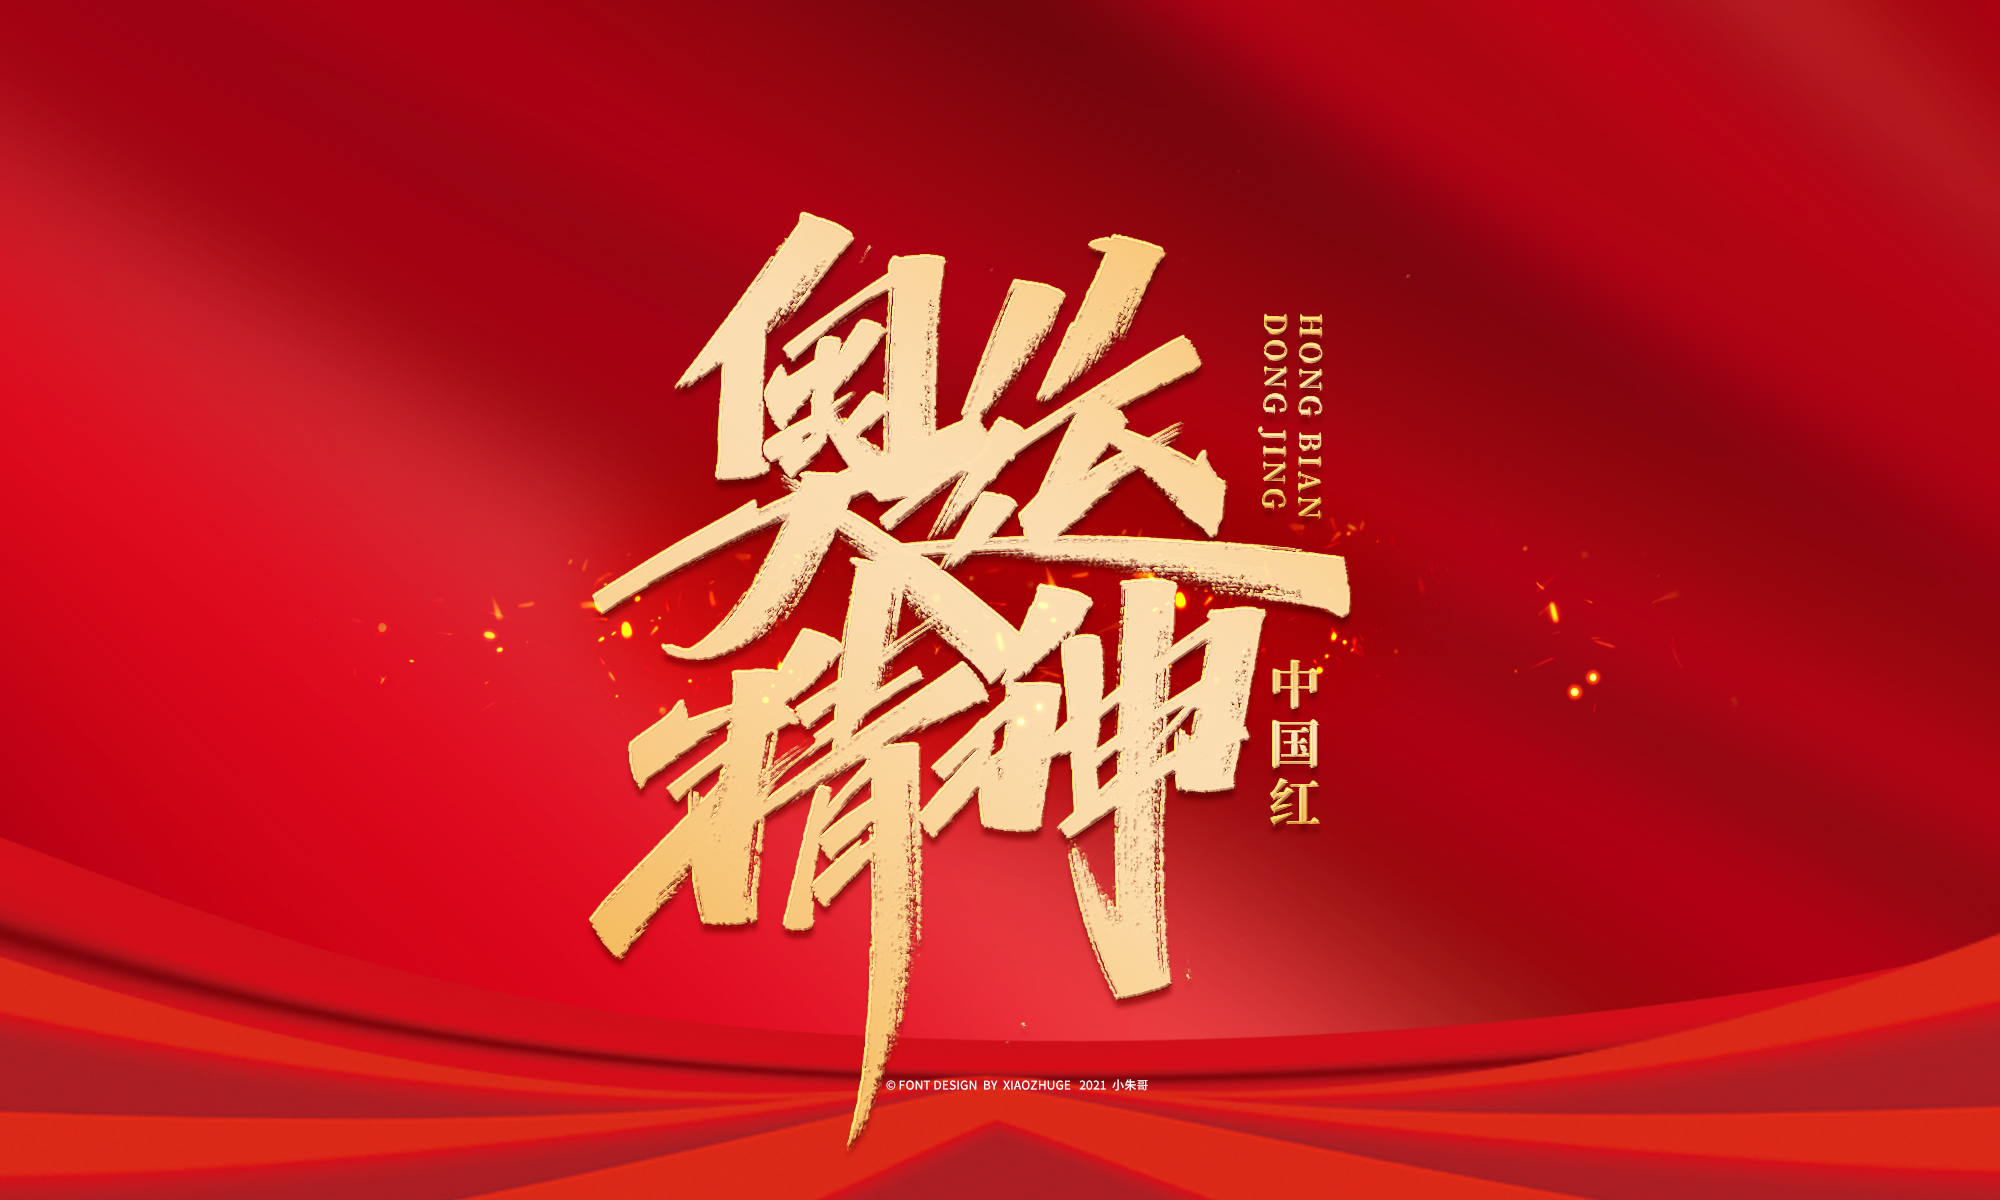 22P Collection of the latest Chinese font design schemes in 2021 #.489